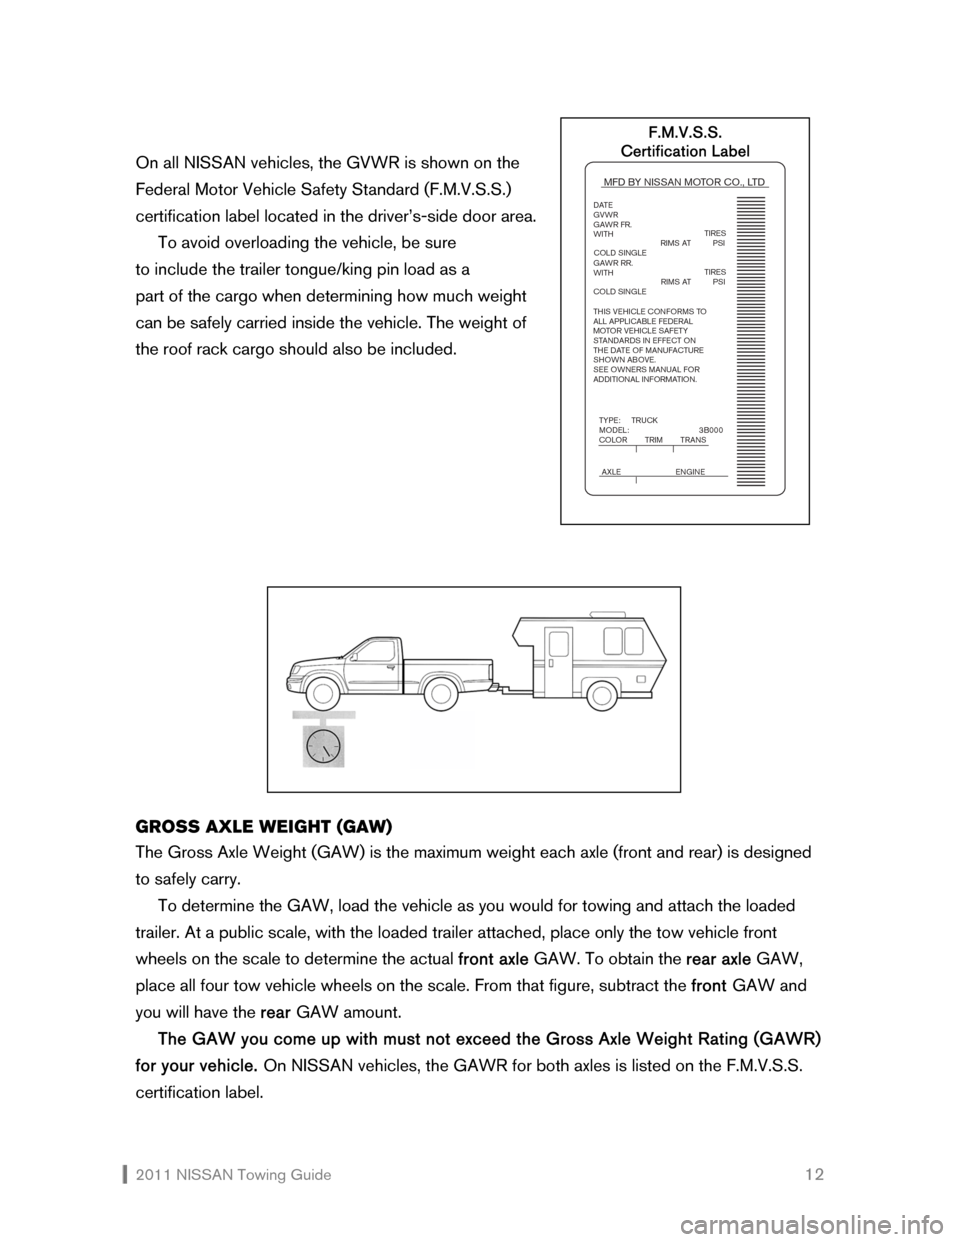 NISSAN CUBE 2011 3.G Towing Guide  2011 NISSAN Towing Guide    12 On all NISSAN vehicles, the GVWR is shown on the  
Federal Motor Vehicle Safety Standard (F.M.V.S.S.) 
certification label located in the driver’s-side door area.  
 